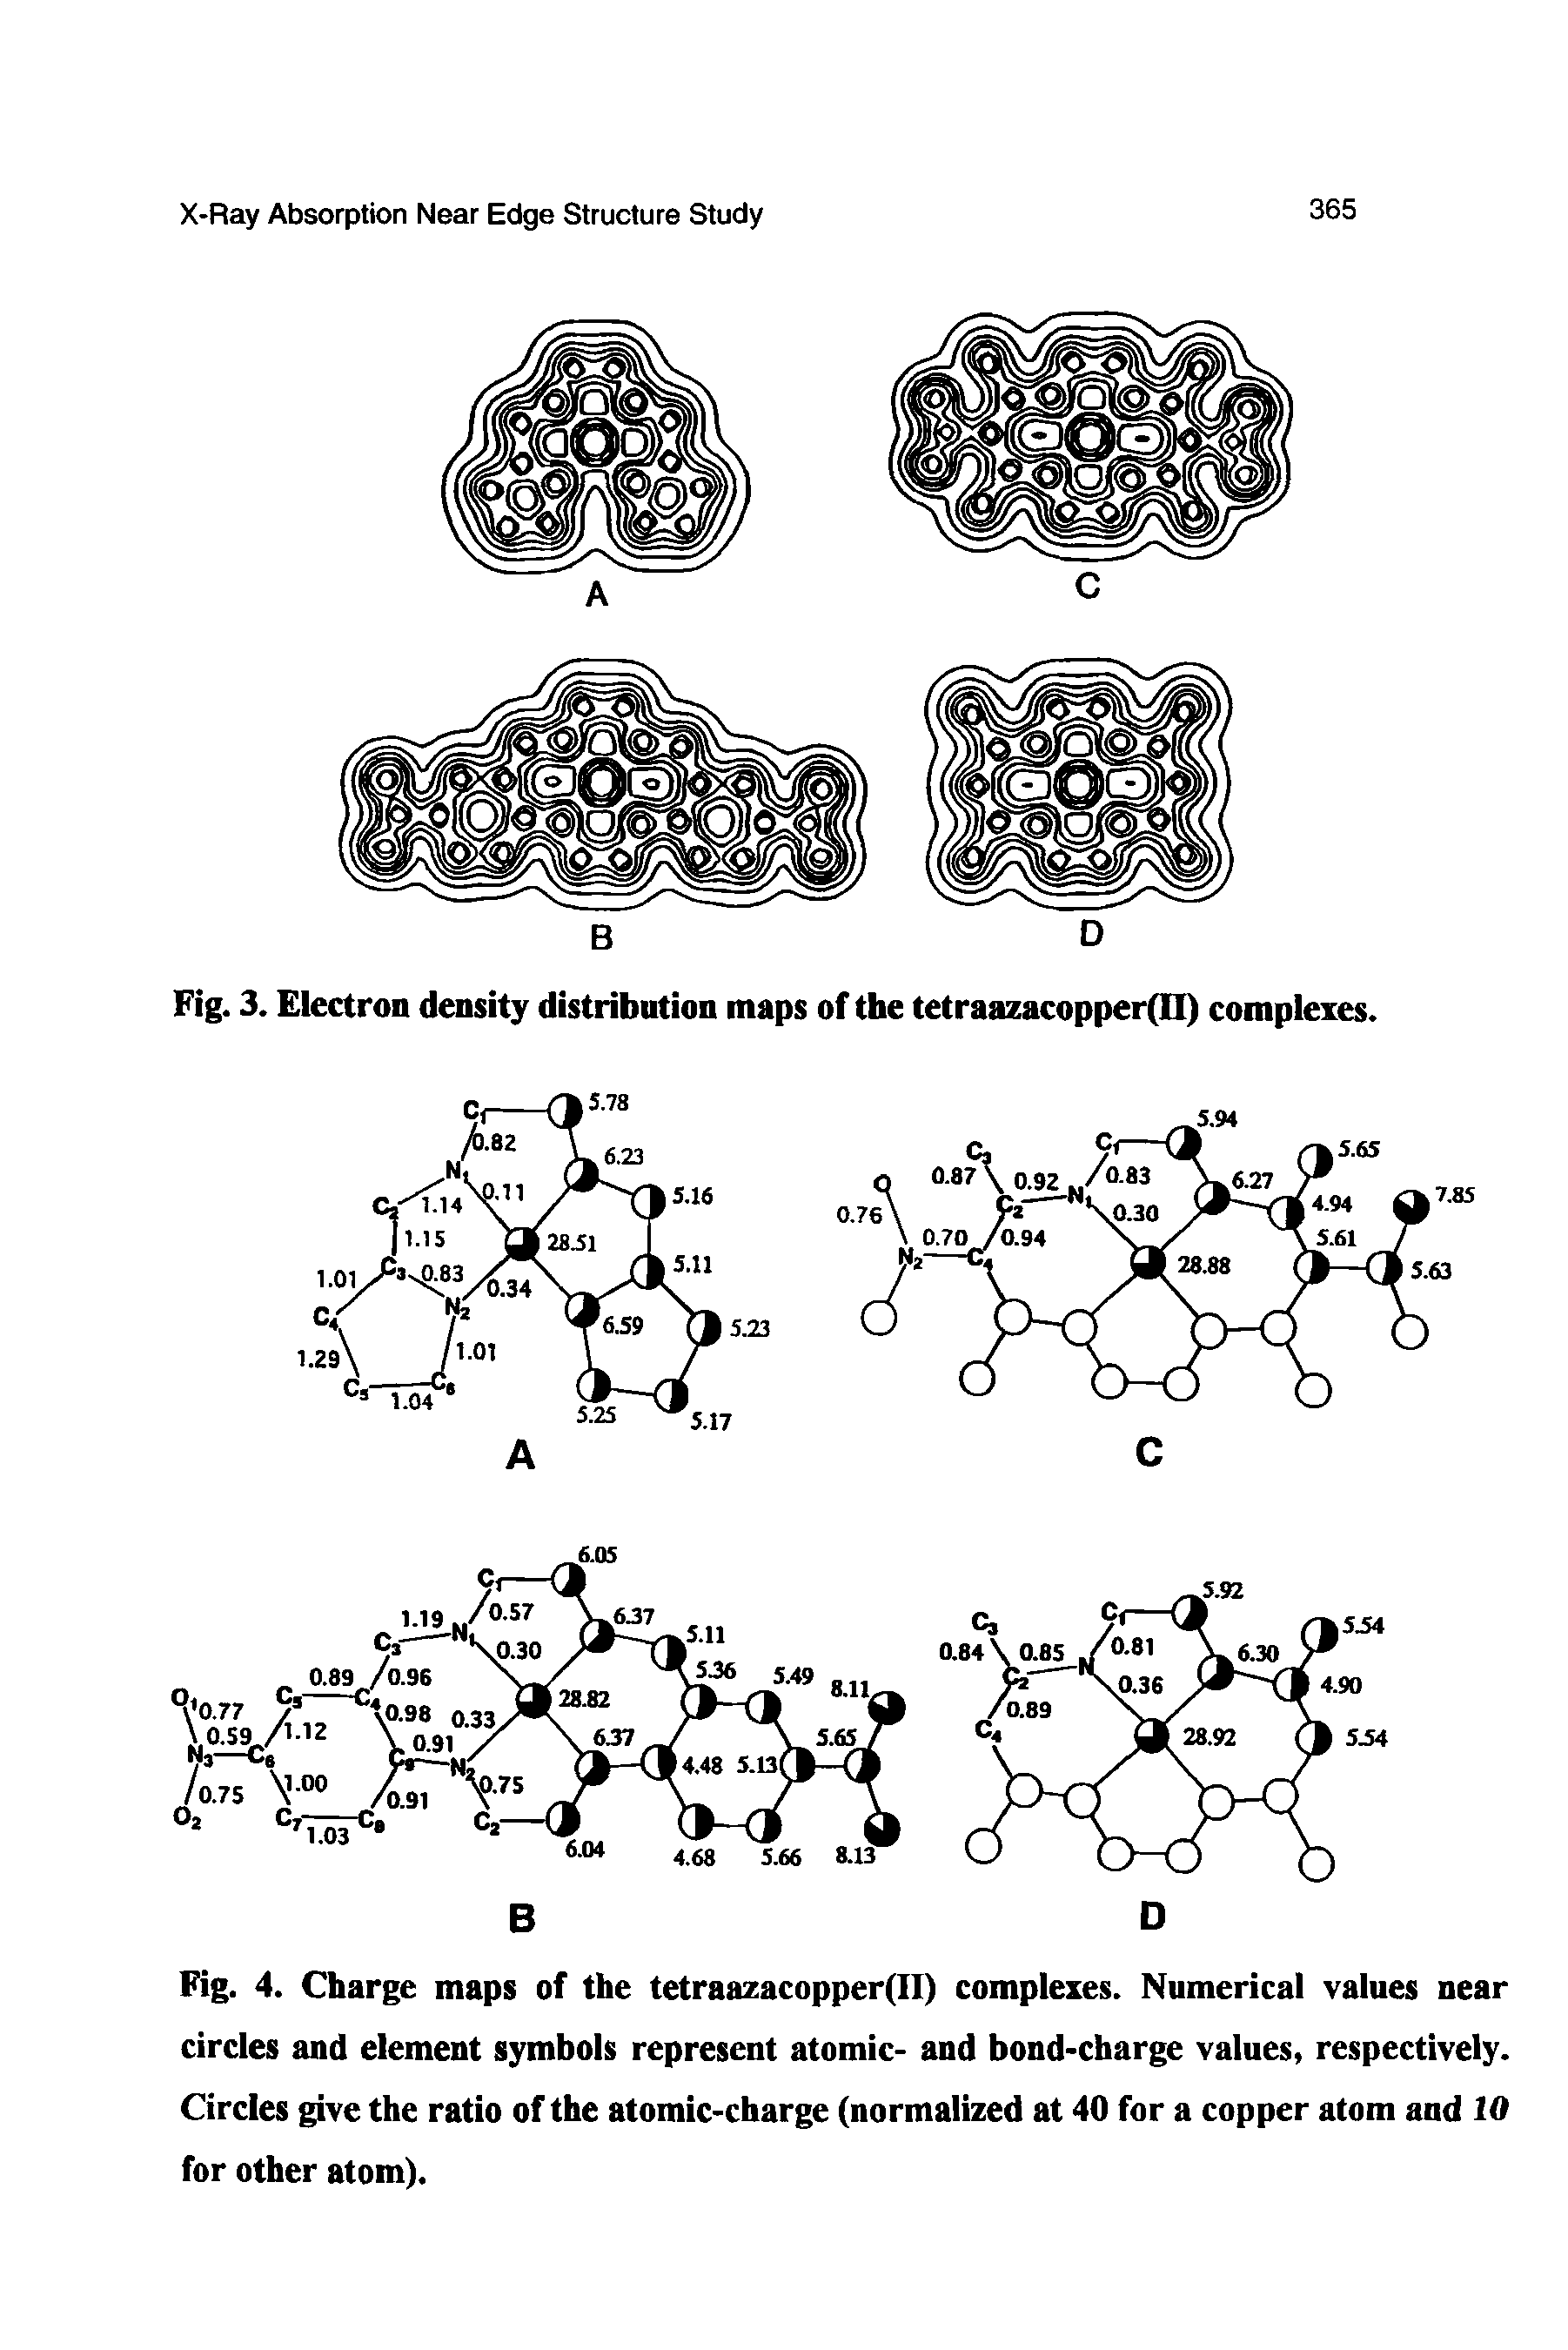 Fig. 4. Charge maps of the tetraazacopper(II) complexes. Numerical values near circles and element symbols represent atomic- and bond-charge values, respectively. Circles give the ratio of the atomic-charge (normalized at 40 for a copper atom and 10 for other atom).